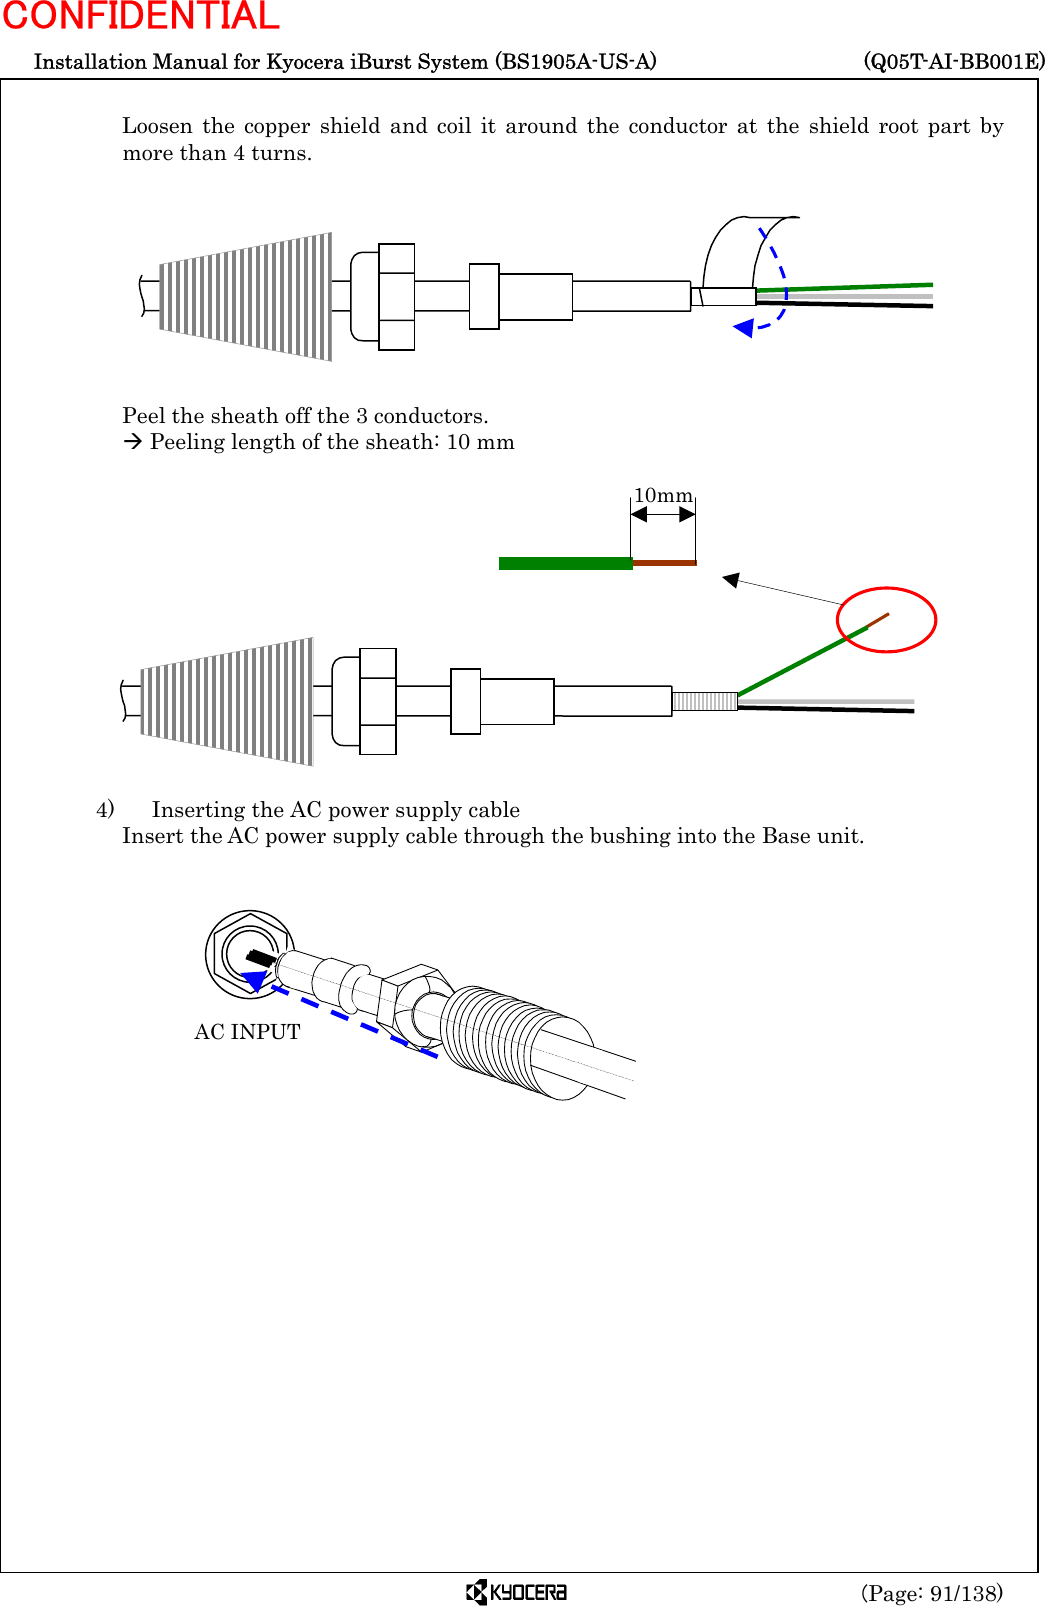  Installation Manual for Kyocera iBurst System (BS1905A-US-A)     (Q05T-AI-BB001E) (Page: 91/138) CONFIDENTIAL  Loosen the copper shield and coil it around the conductor at the shield root part by more than 4 turns.          Peel the sheath off the 3 conductors. Æ Peeling length of the sheath: 10 mm              4)    Inserting the AC power supply cable Insert the AC power supply cable through the bushing into the Base unit.          10mm AC INPUT 